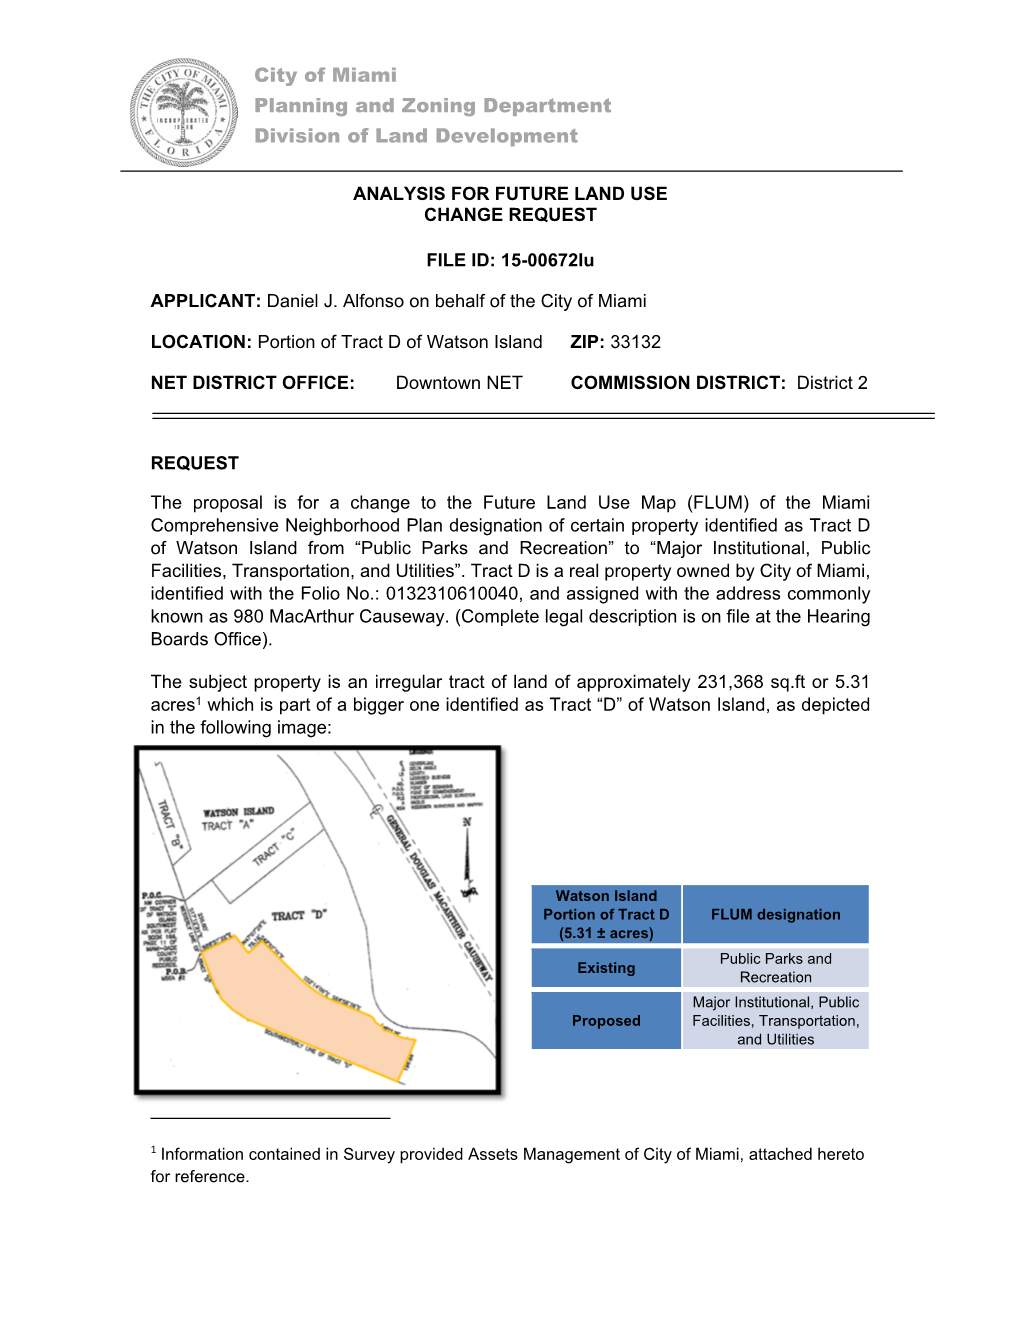 City of Miami Planning and Zoning Department Division of Land Development